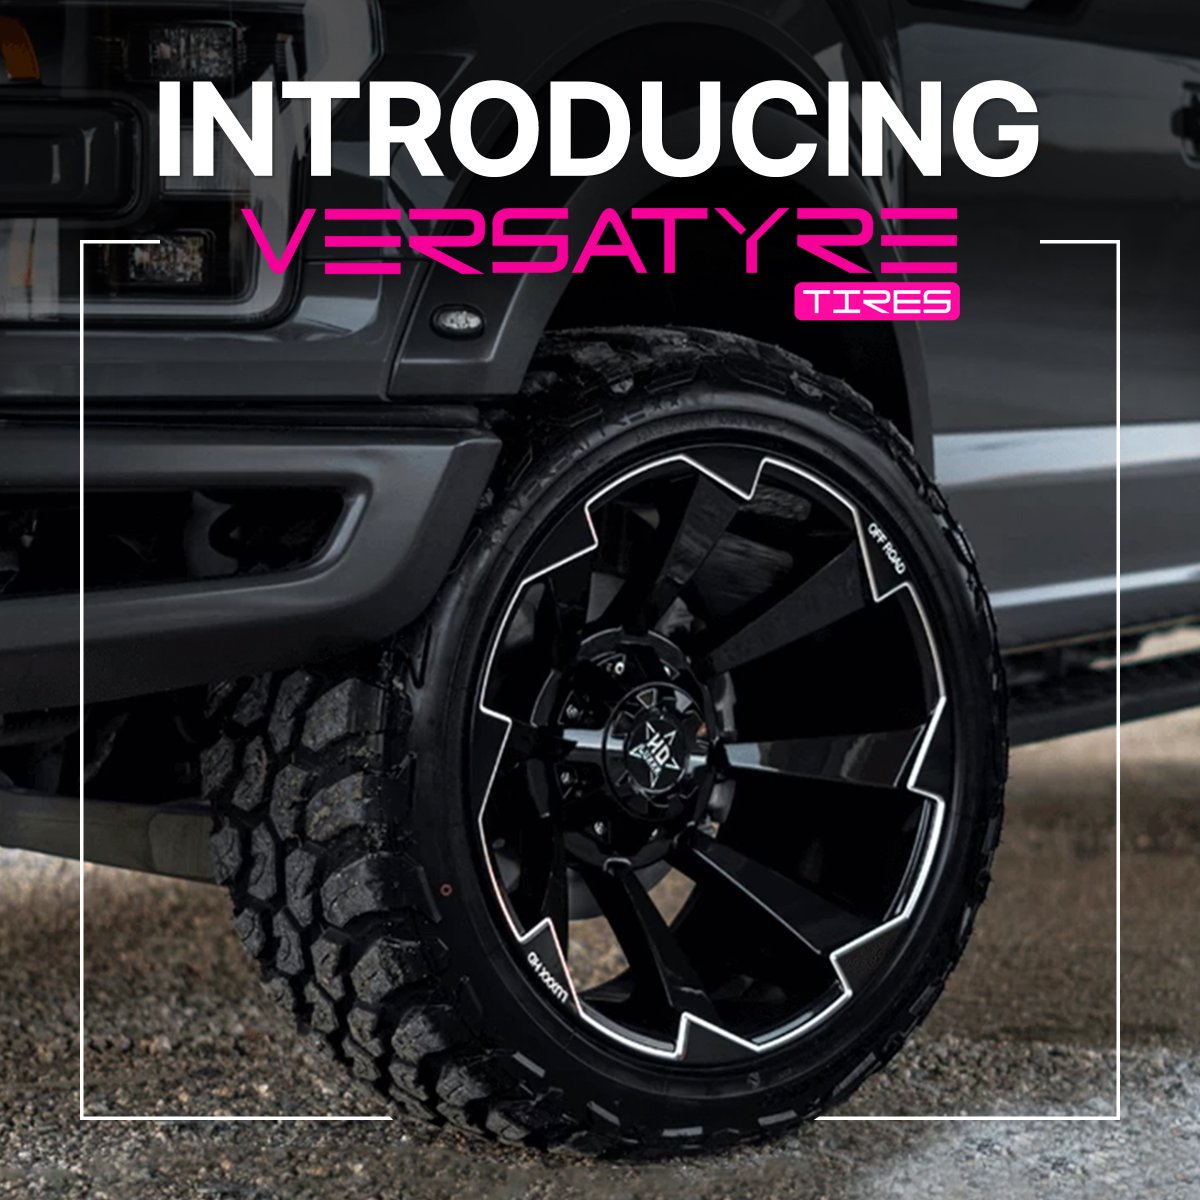 Meet Versatyre: A passionate, professional tire brand making waves in the industry! From car shows to truck nationals, their community is everywhere. Get top-notch tires for light trucks, SUVs, and more! Shop now tireagent.com #tireagent #tires #cars #tireshopping